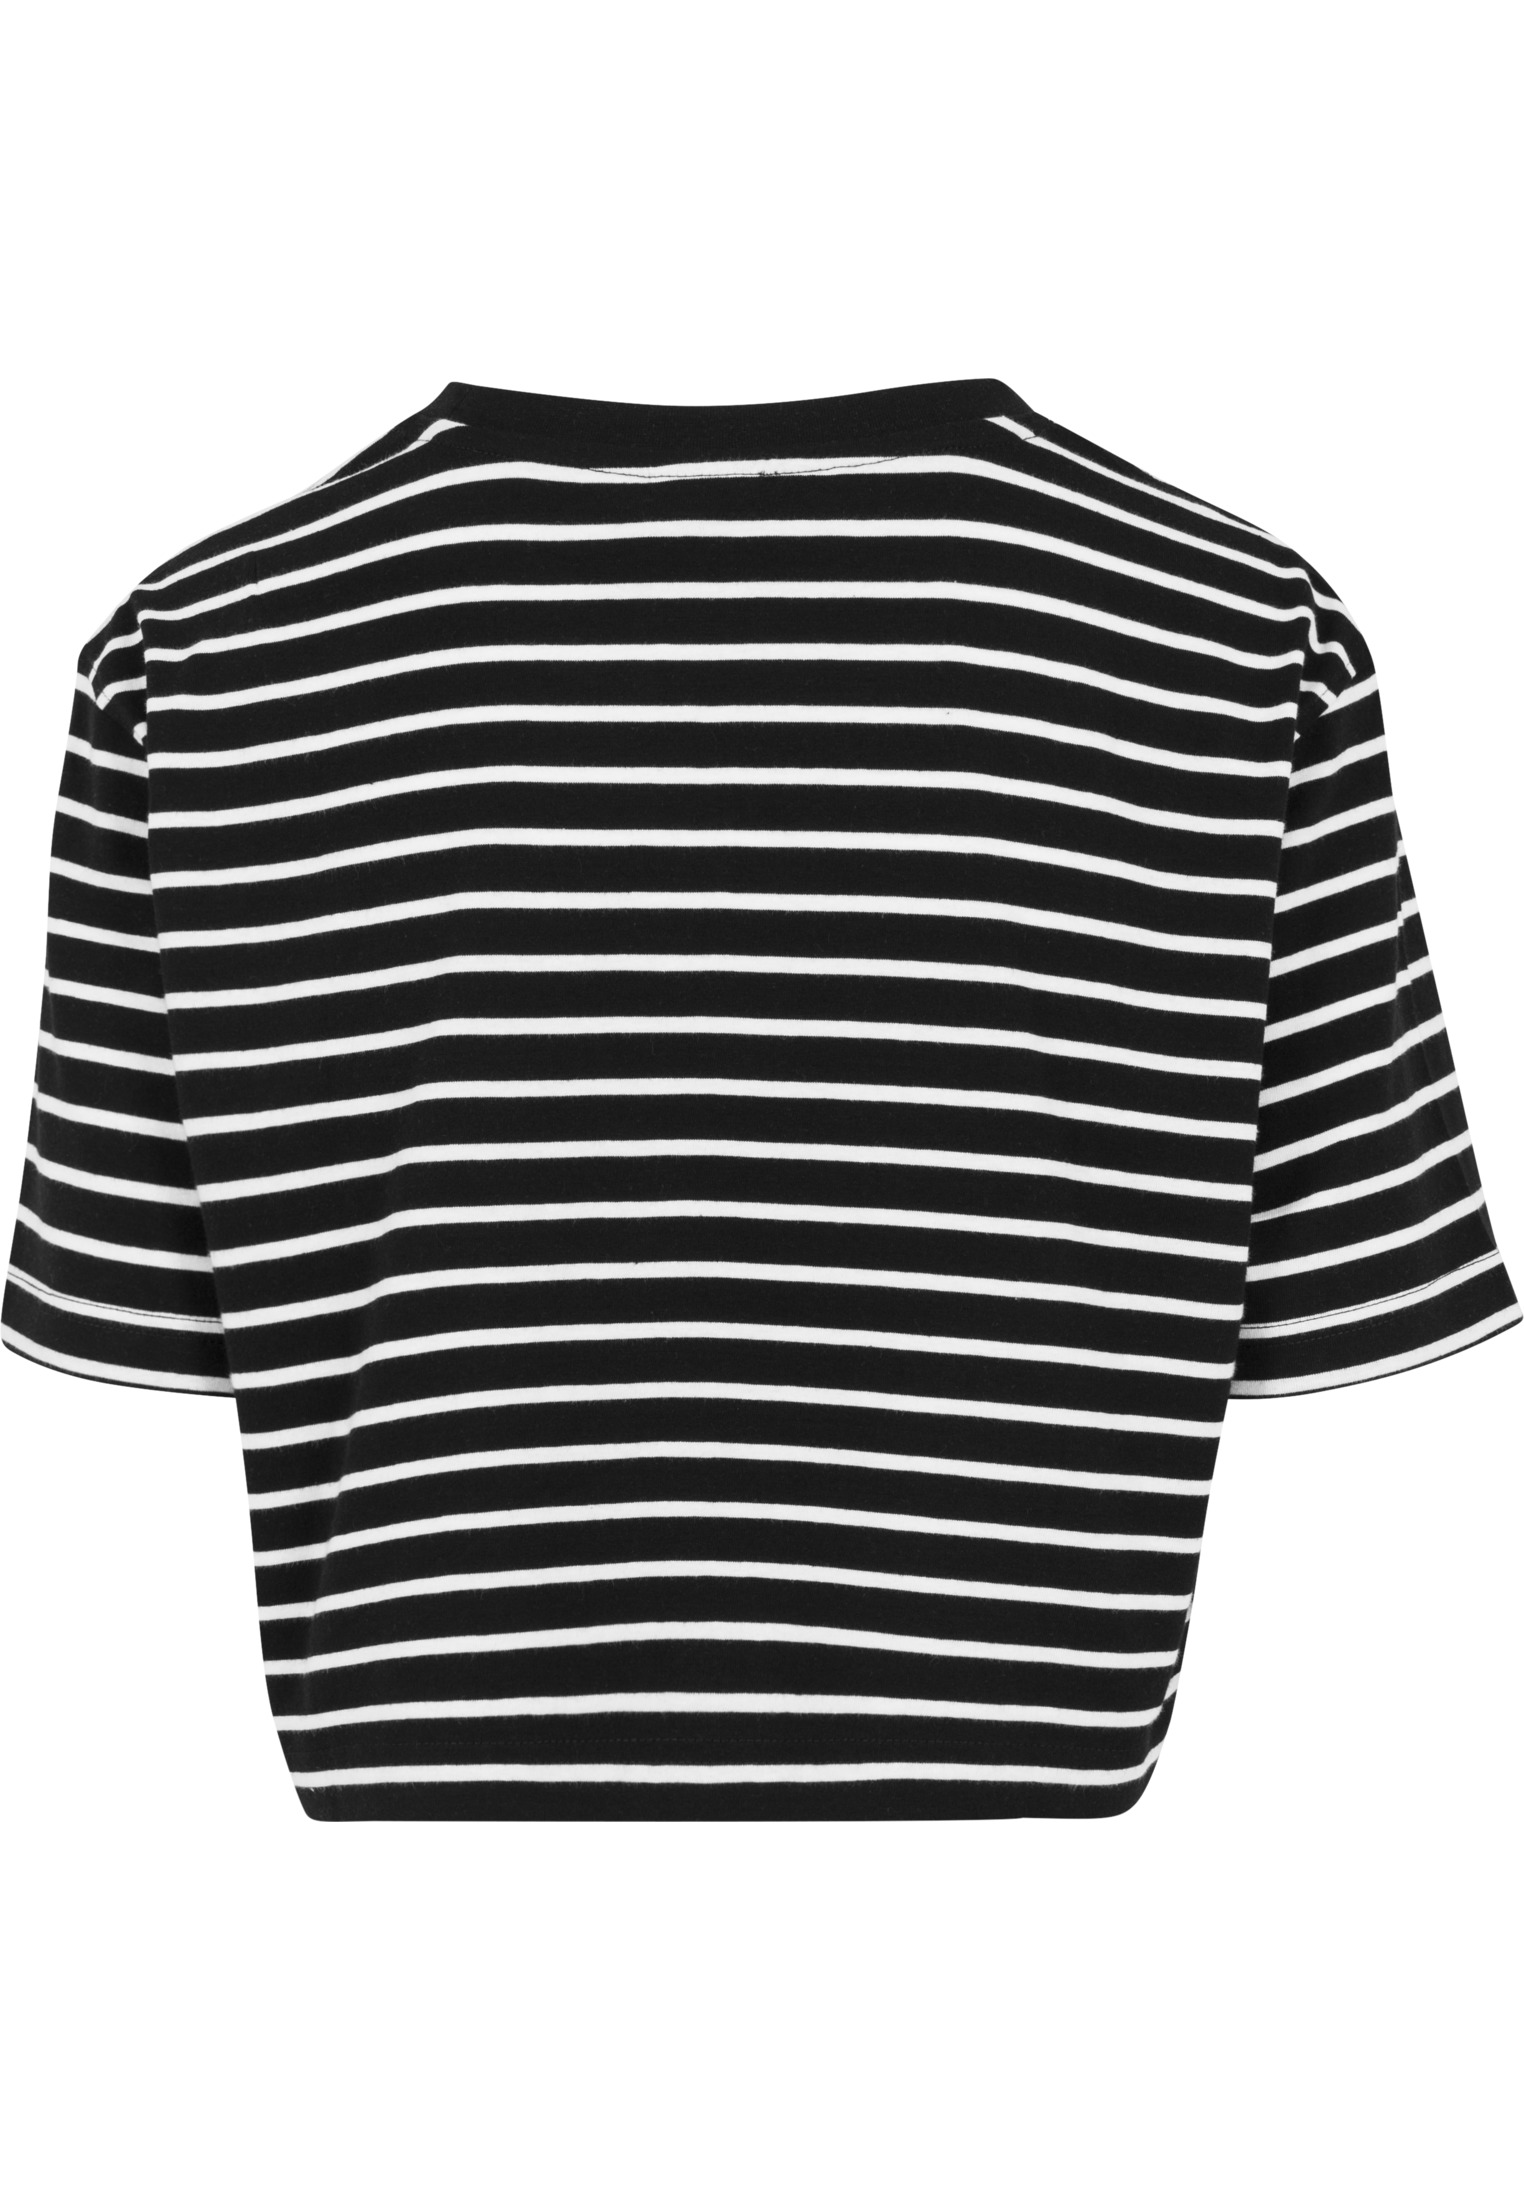 Cropped Tees Ladies Short Striped Oversized Tee in Farbe blk/wht